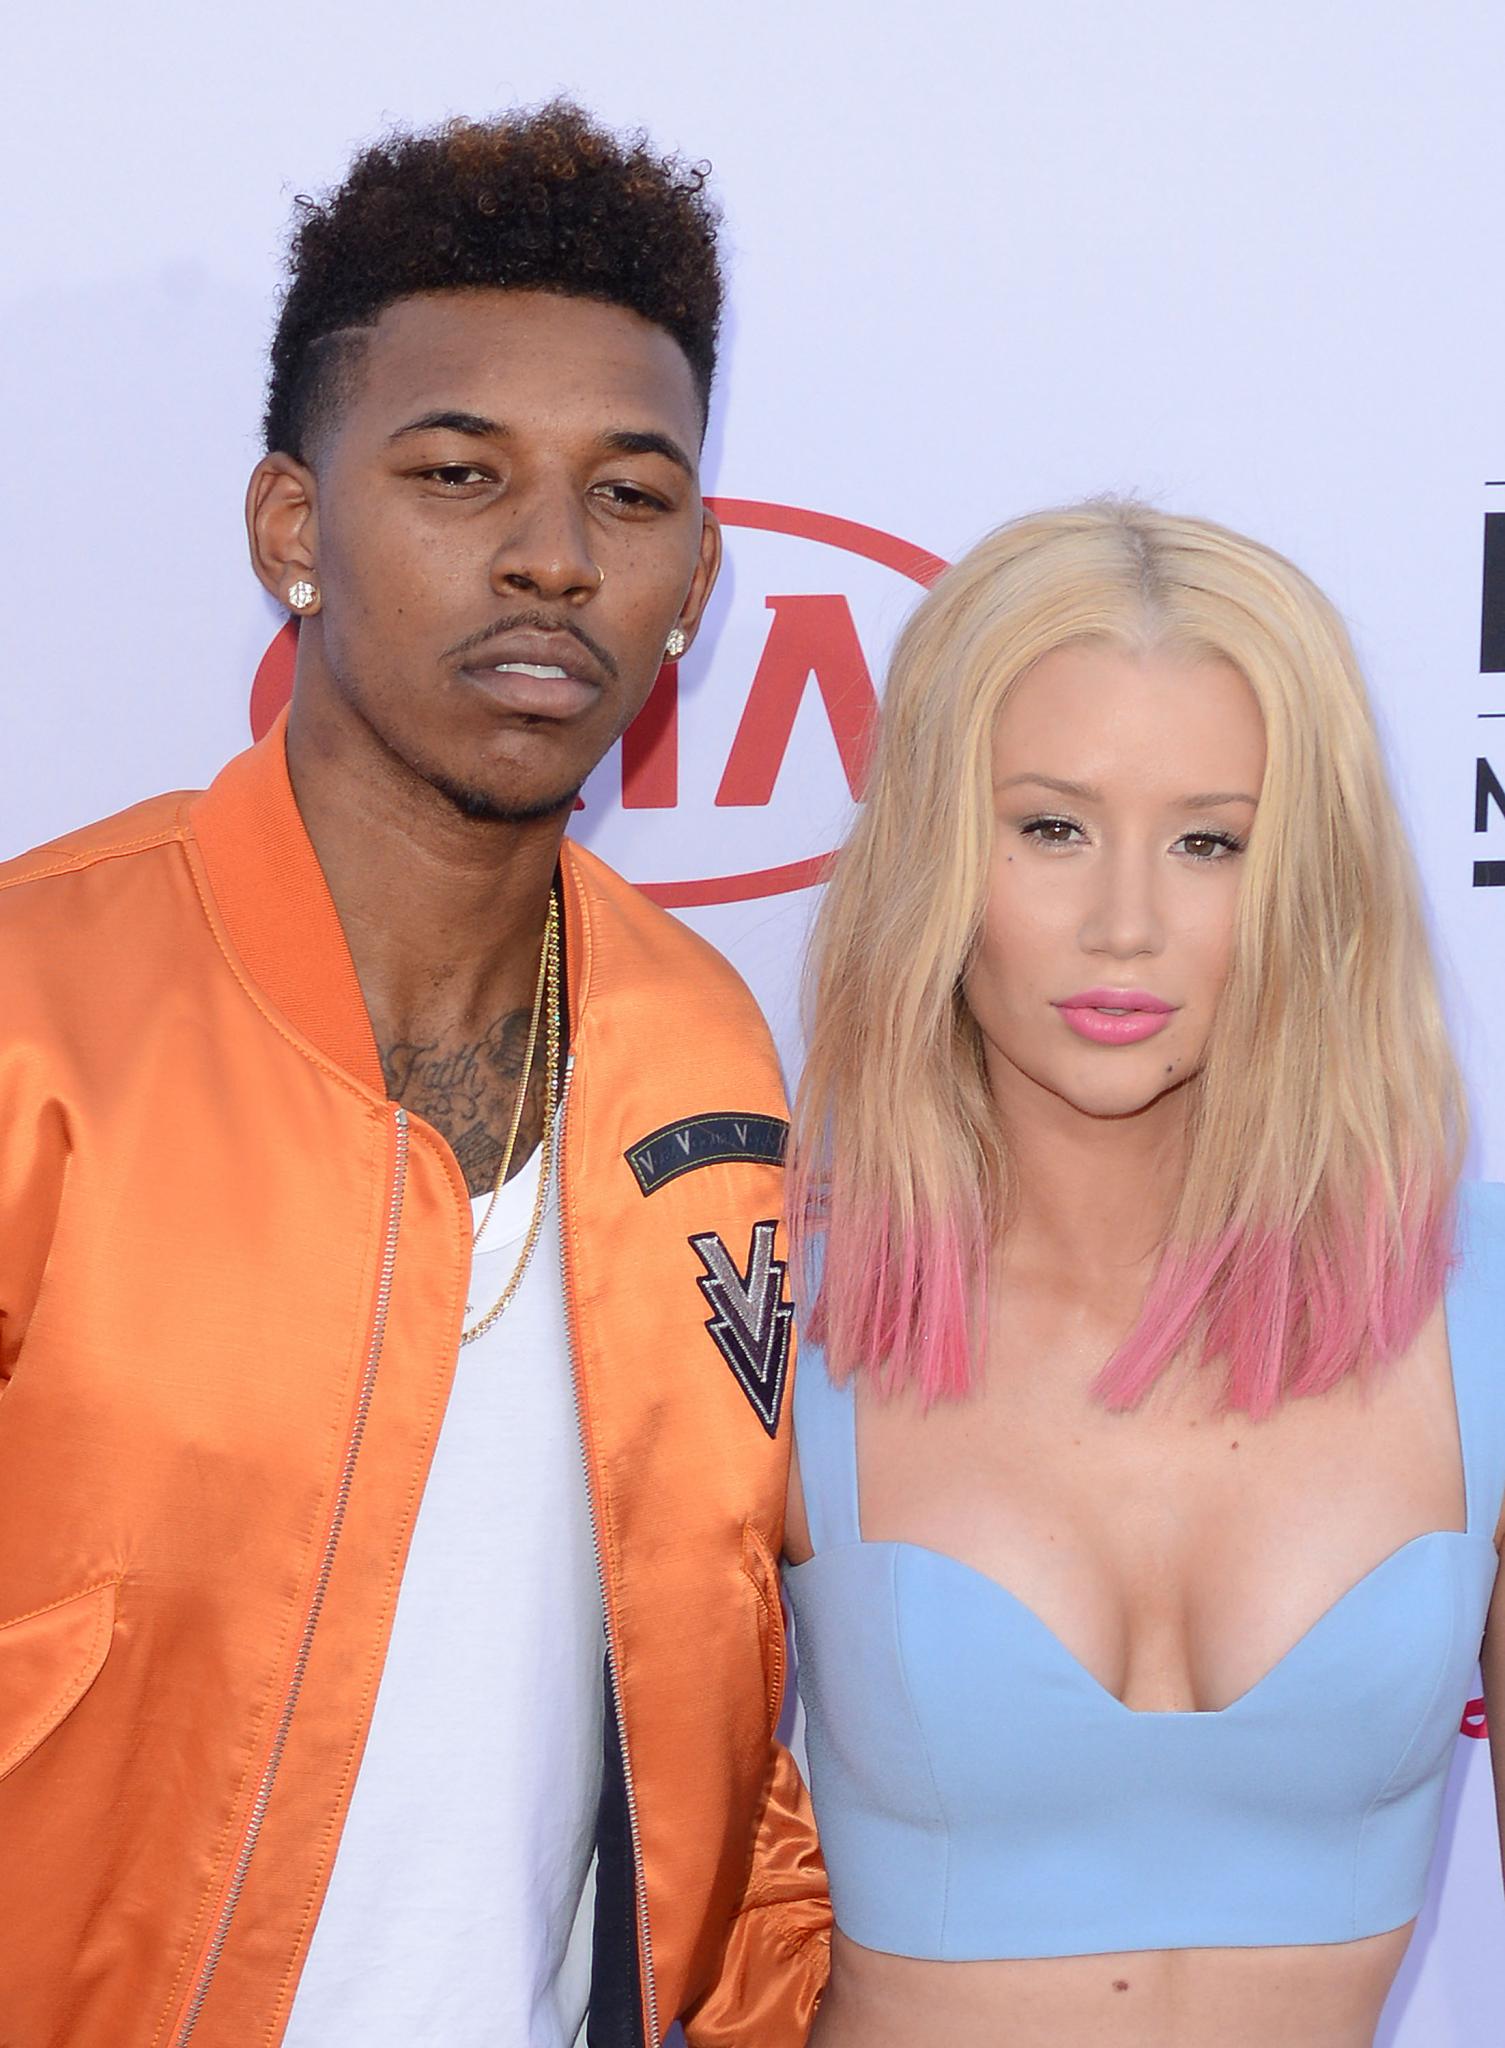 D'Angelo Russell Shunned By Teammates After Leaking Video of Nick Young Confessing to Cheating on Iggy Azalea